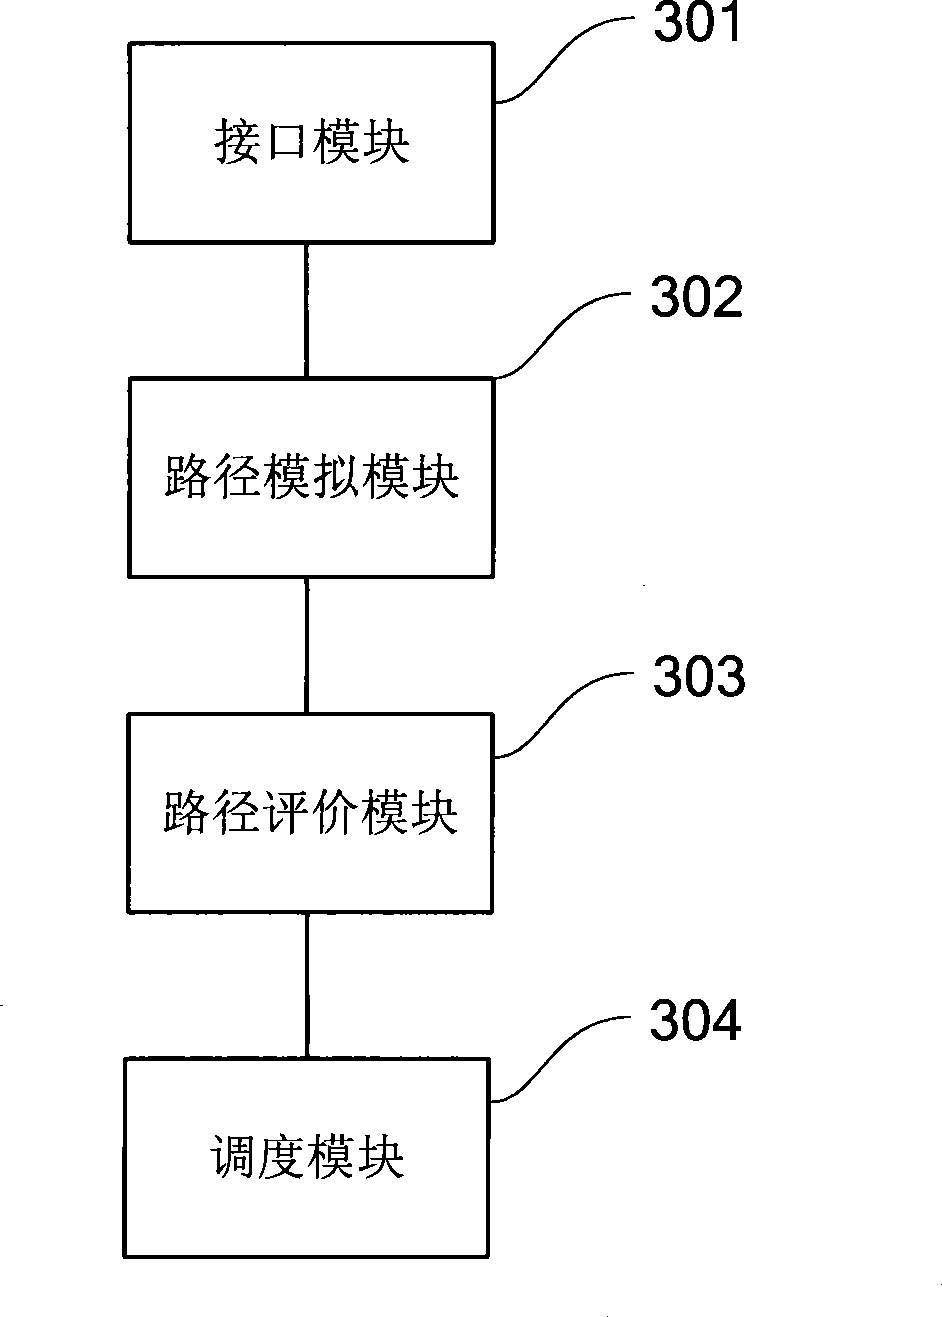 Method and device for wafer optimized scheduling